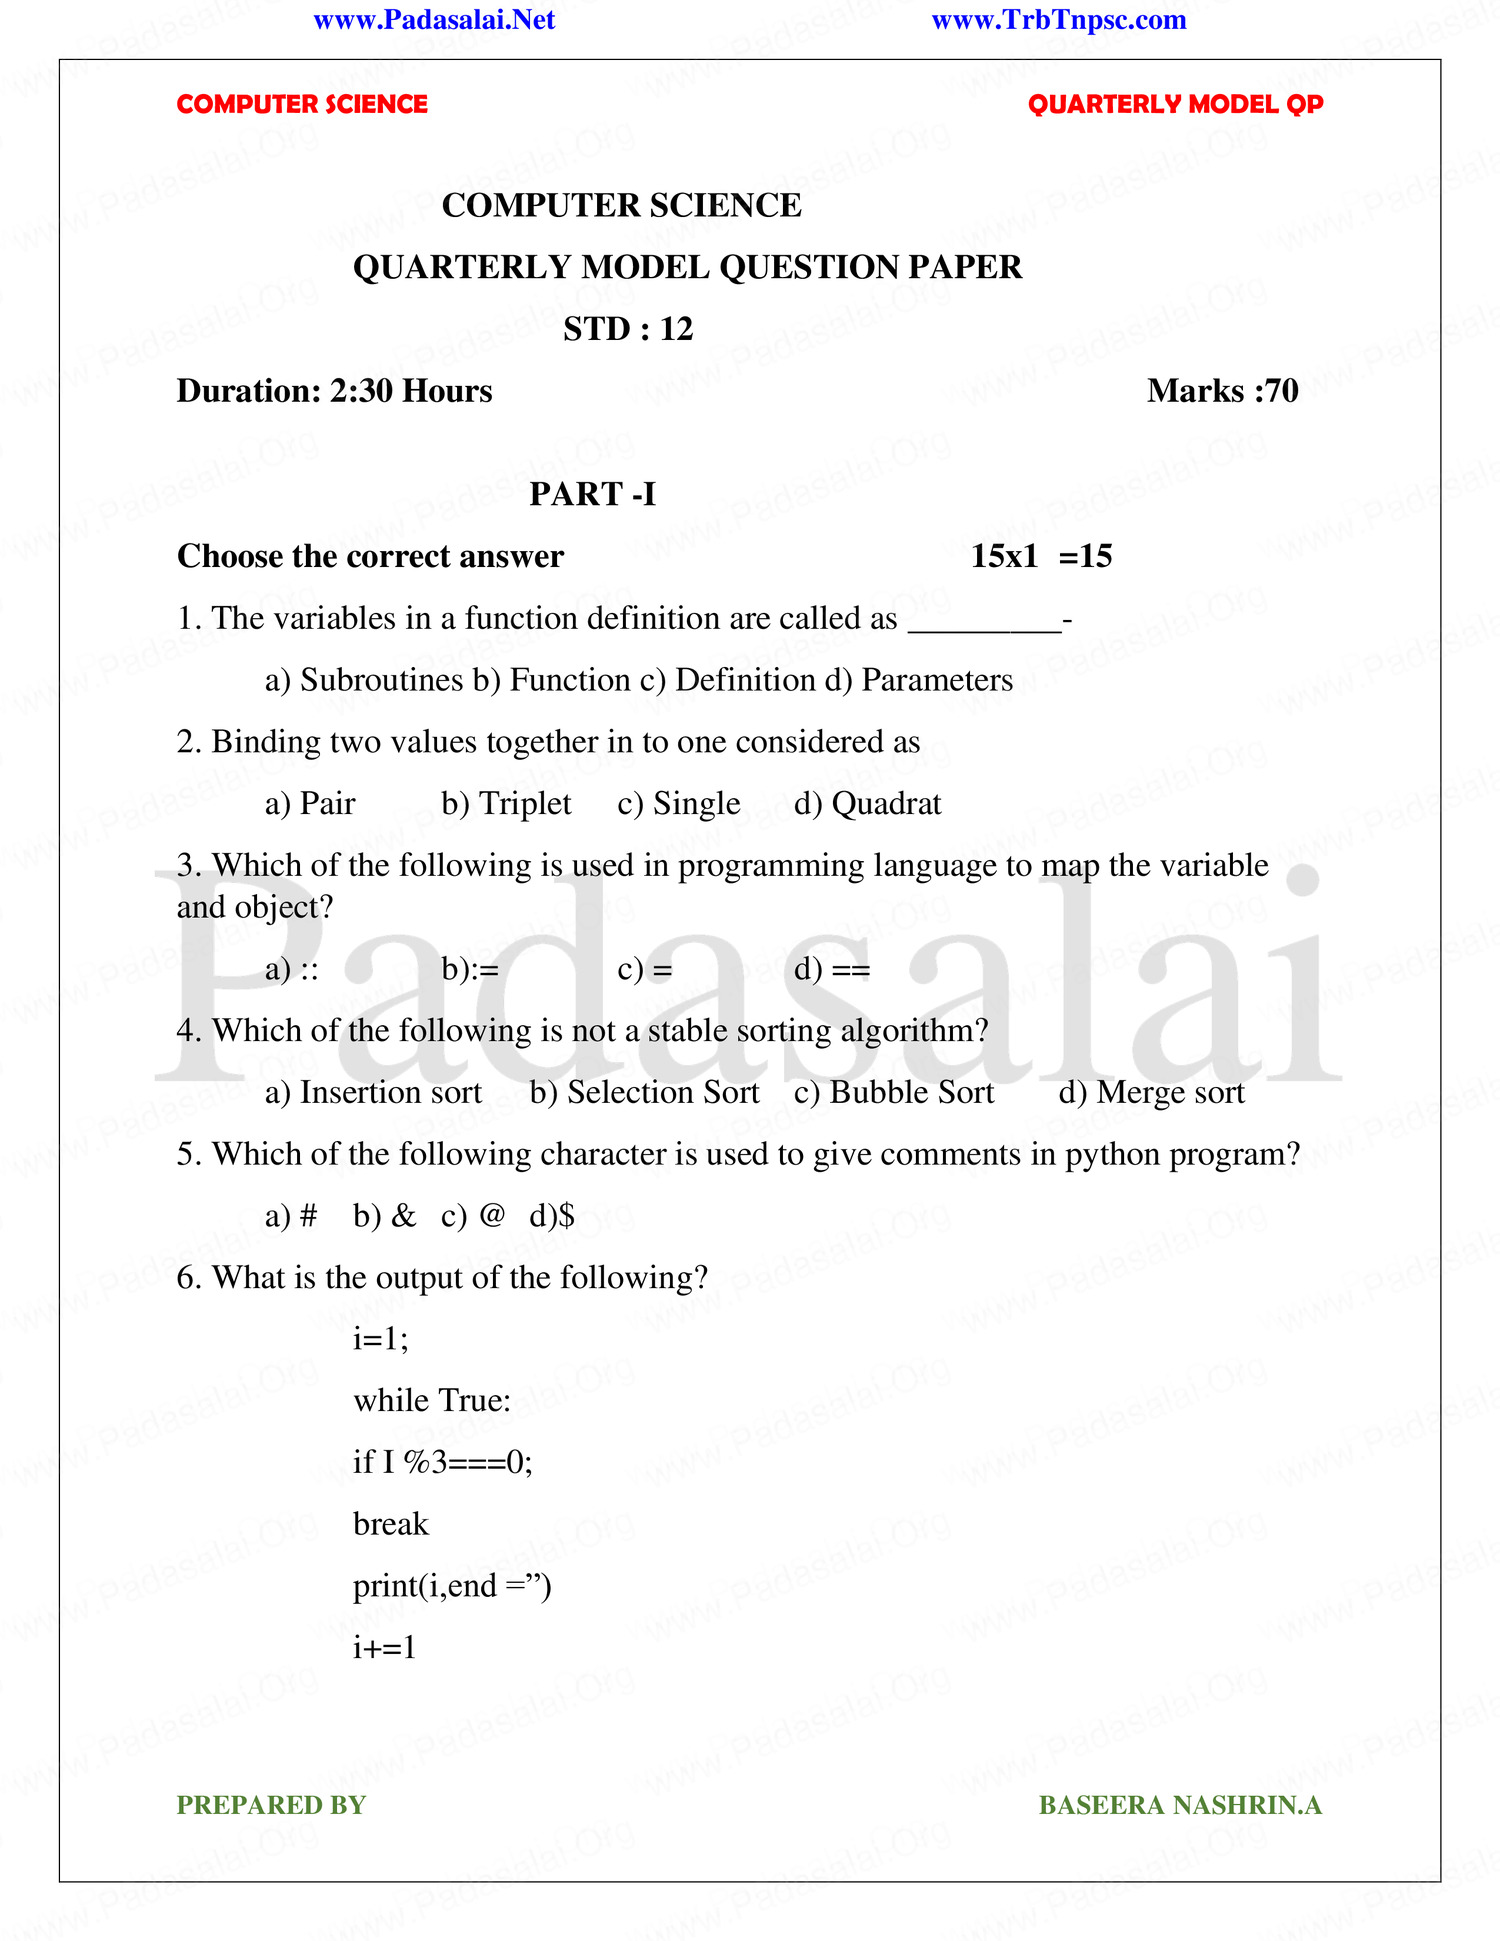 phd in computer science question paper